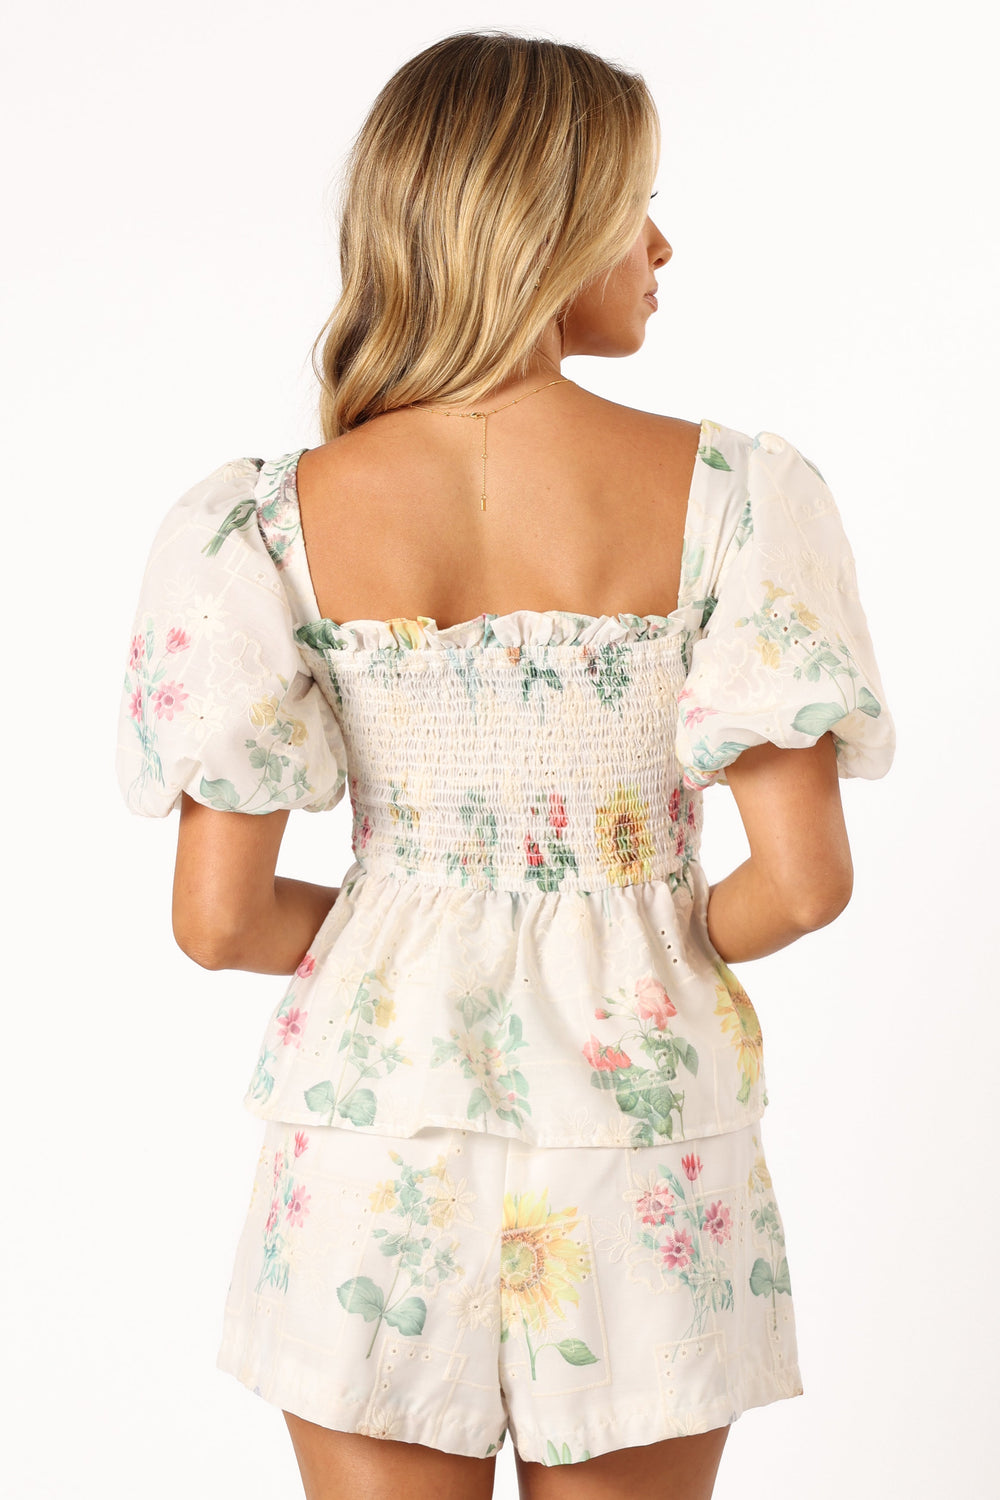 TOPS @Amalie Top - White Floral